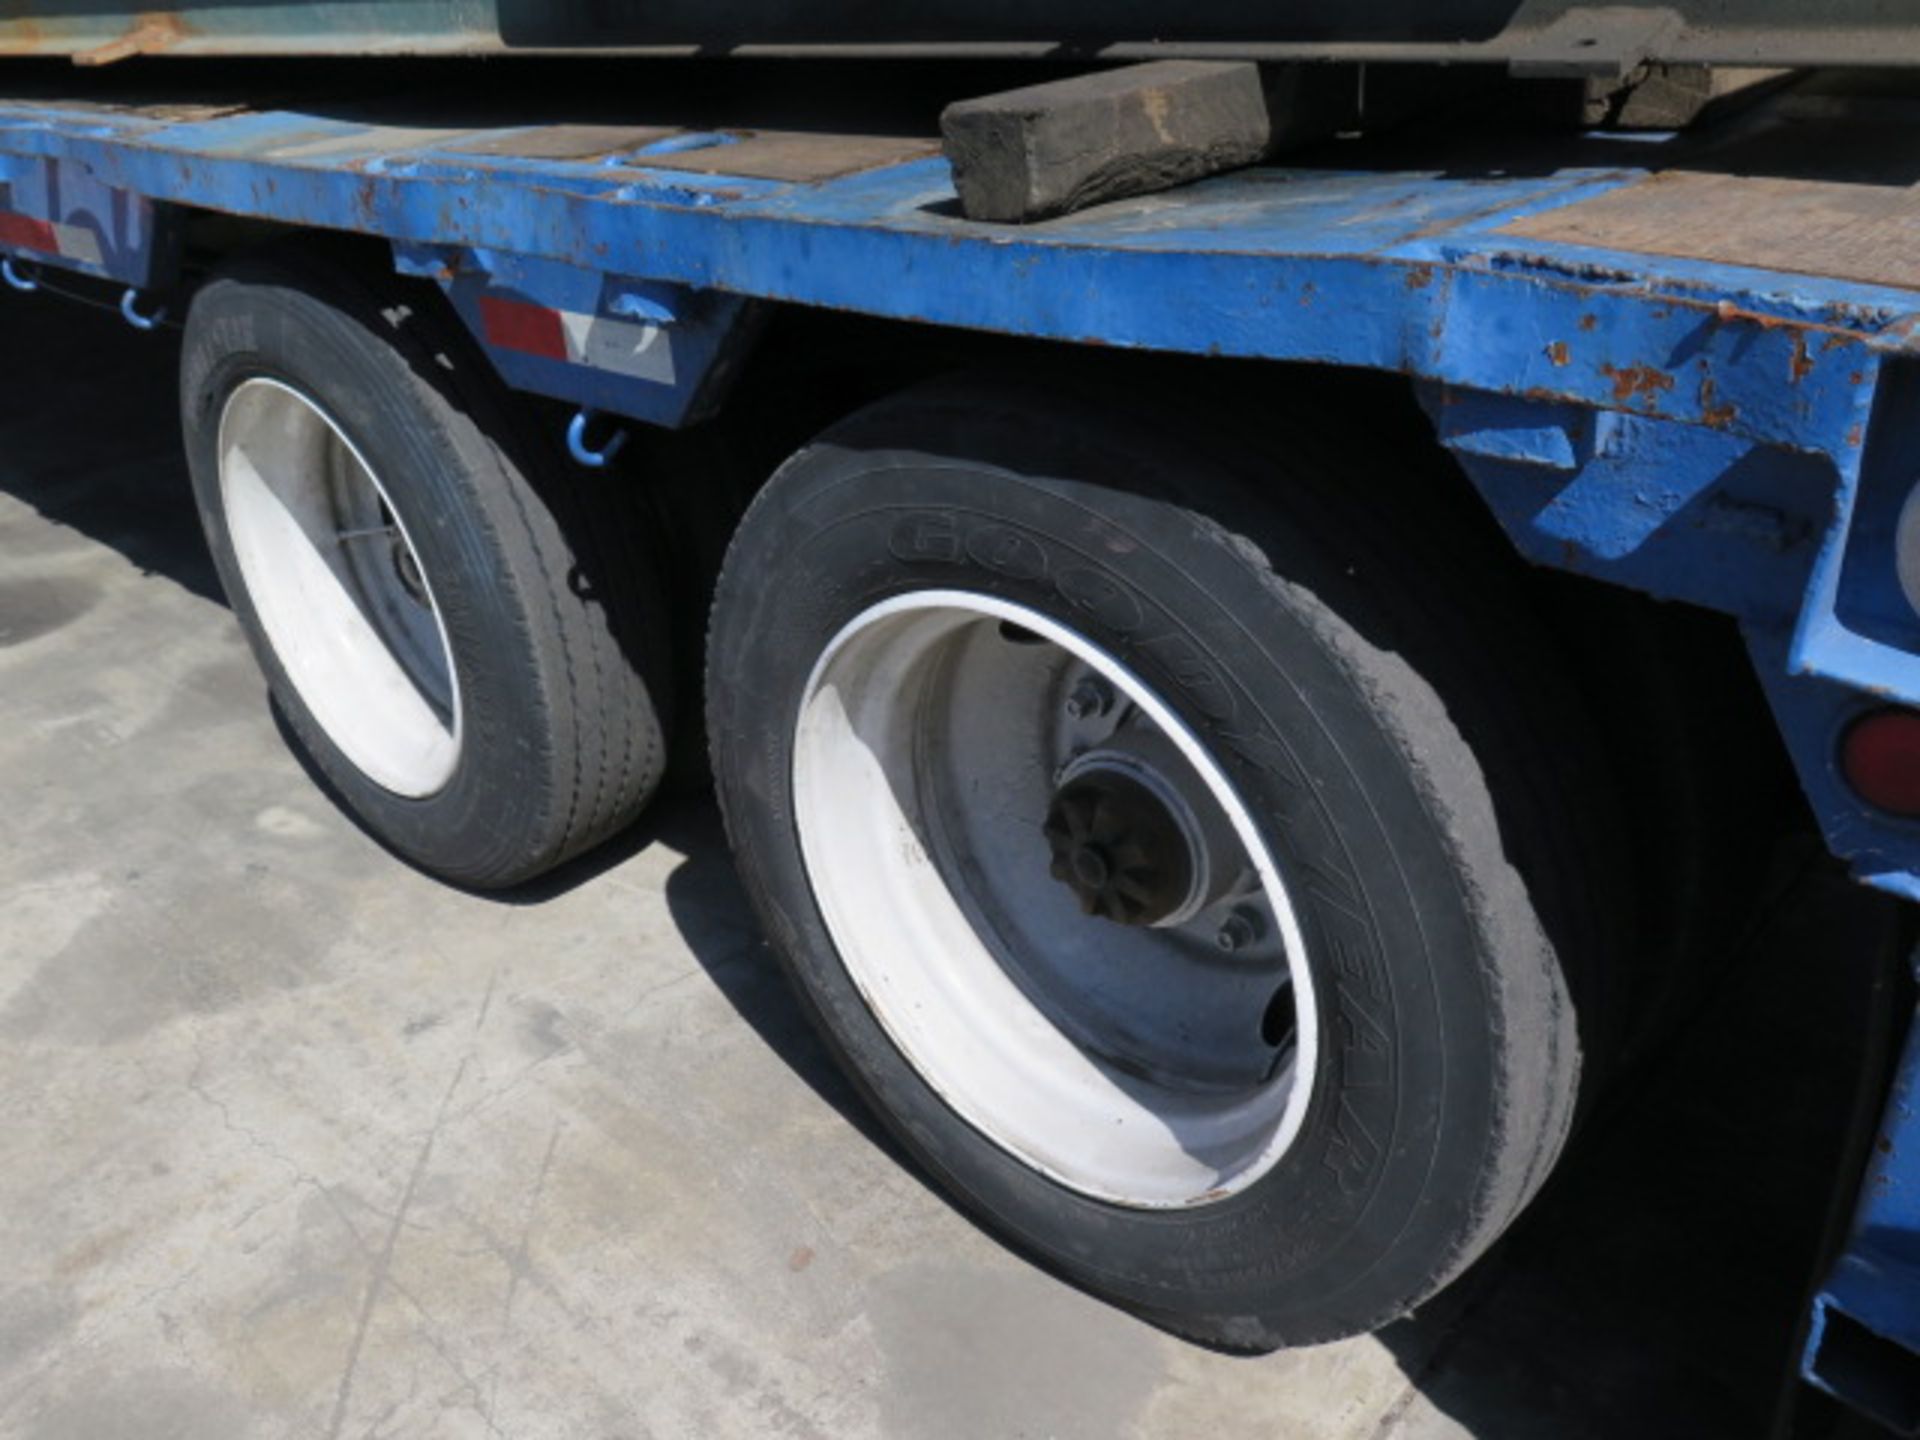 Drop-Deck Trailer Lisc 4KU8502 (SOLD AS-IS - NO WARRANTY) - Image 11 of 16